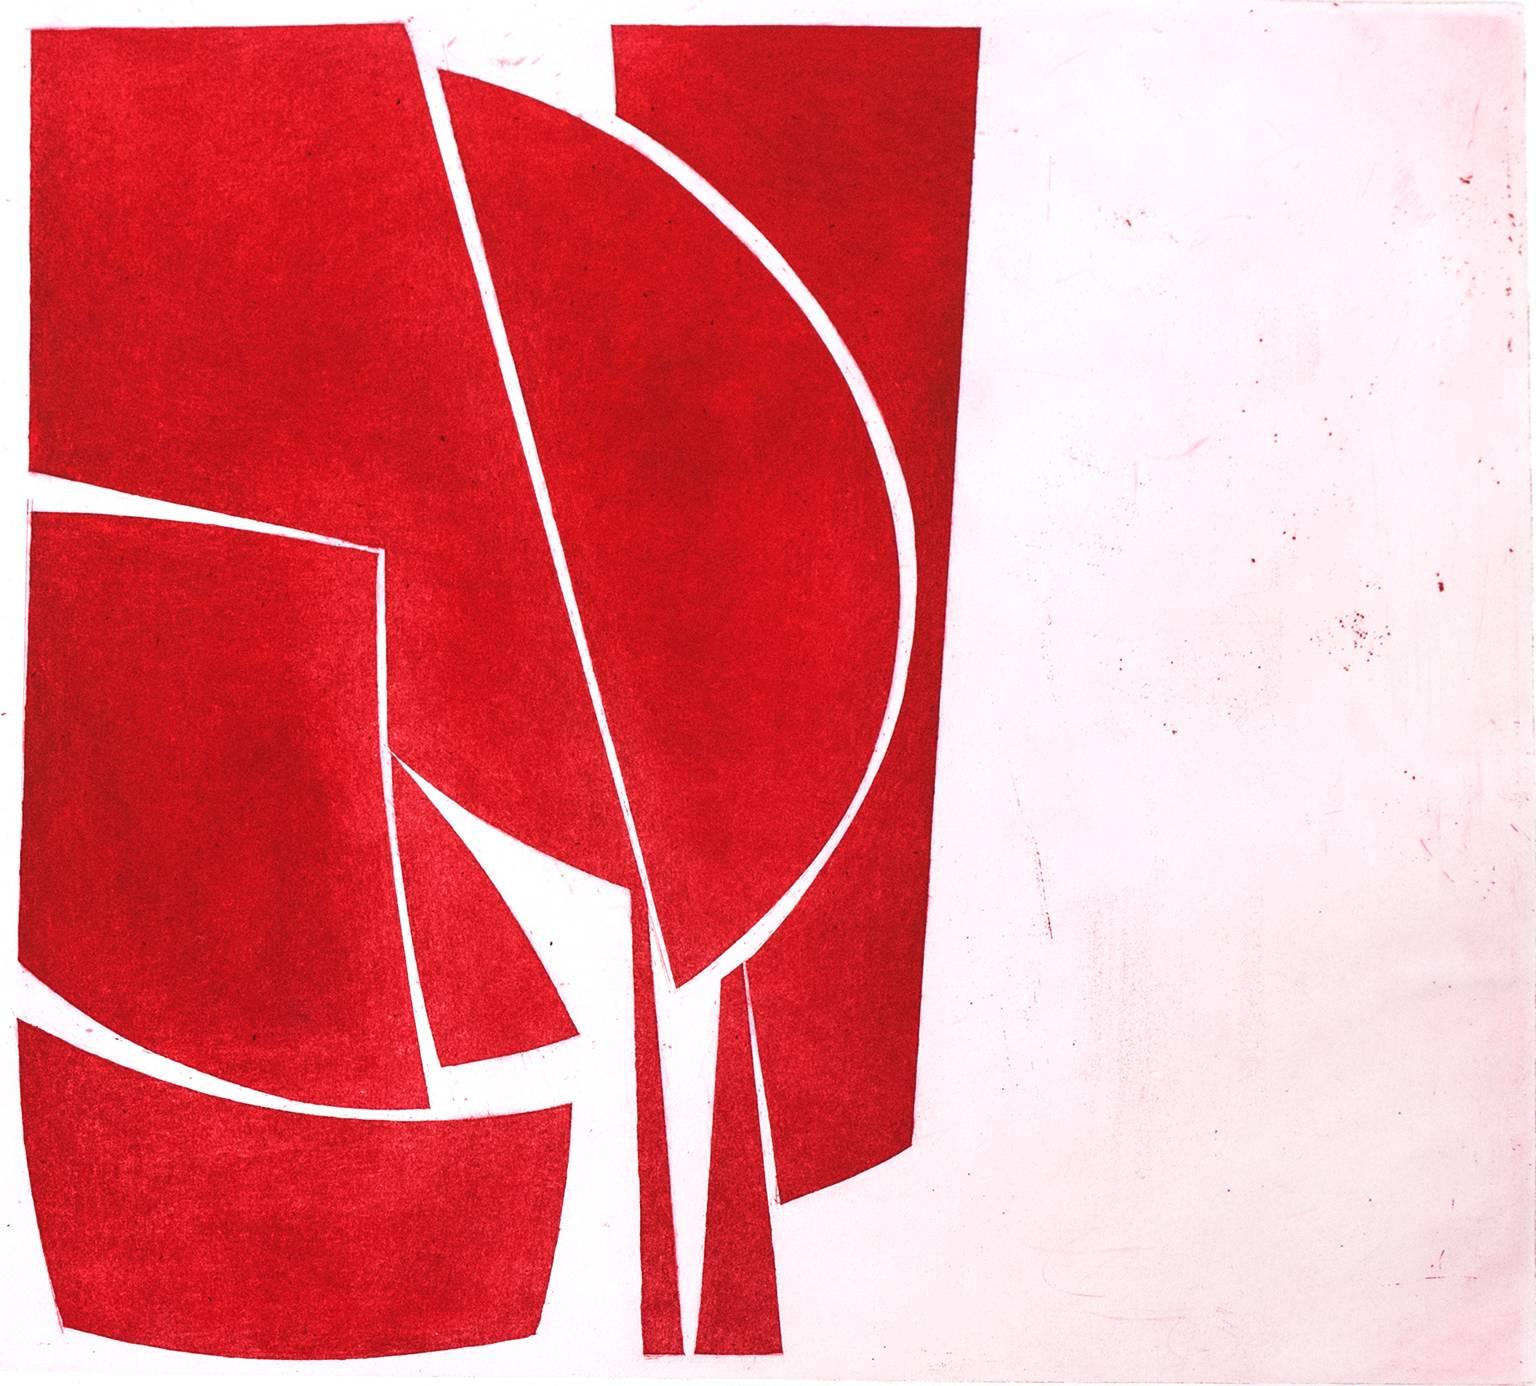 Joanne Freeman Abstract Print - "Covers 1 Red", abstract aquatint print, mid-century modern influenced, red.